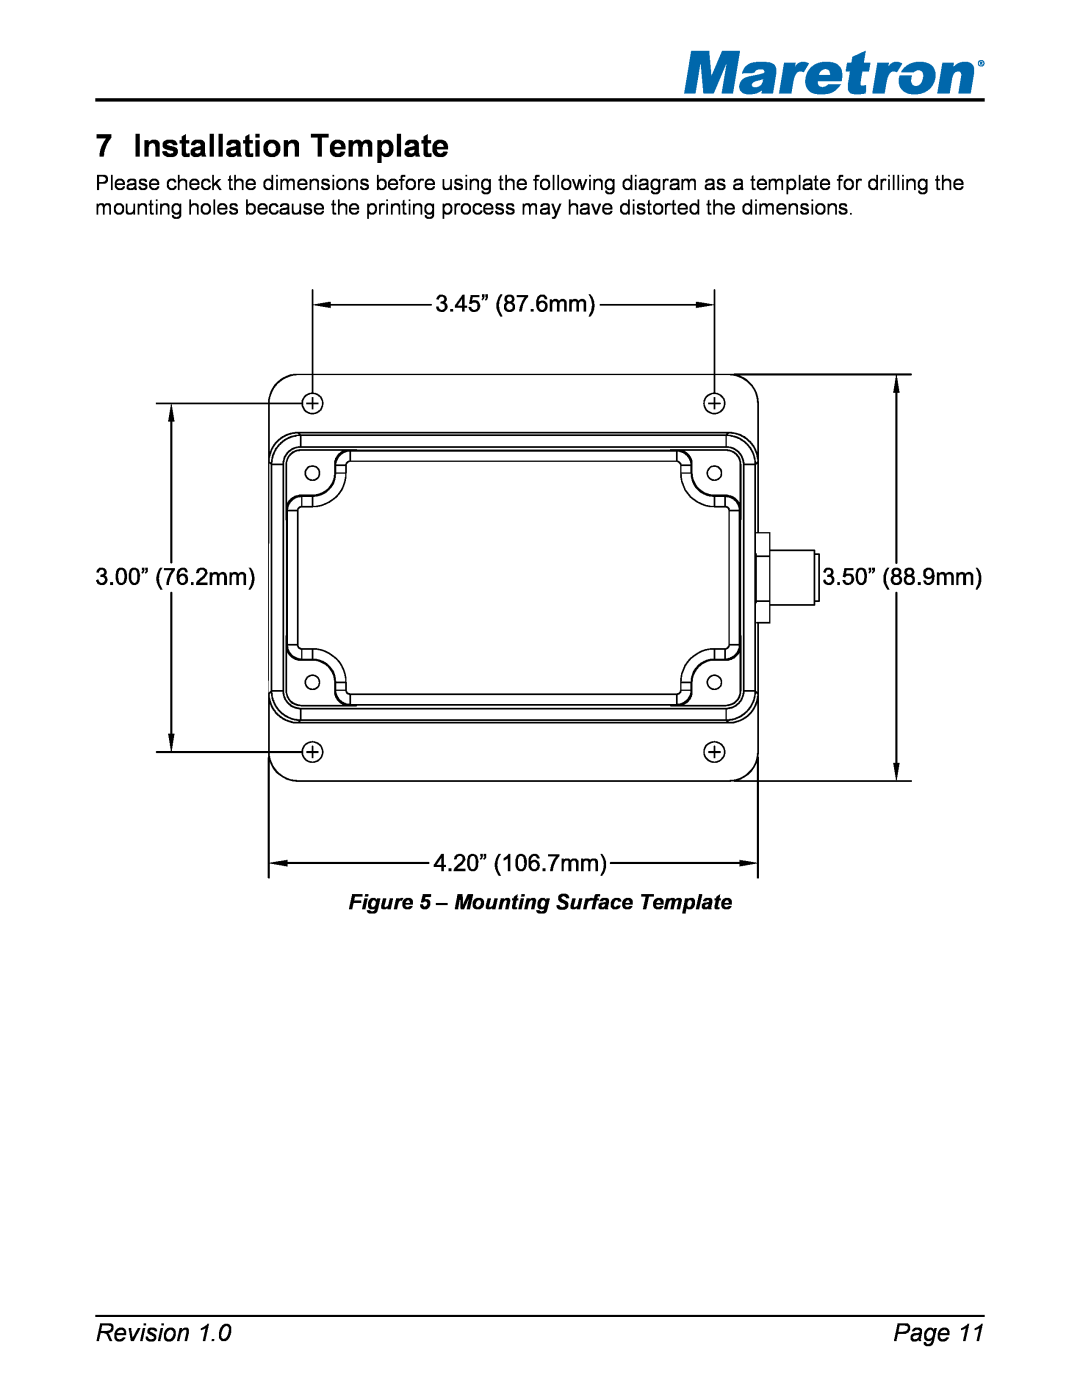 Maretron SIM100 user manual Installation Template, Mounting Surface Template, Revision, Page 